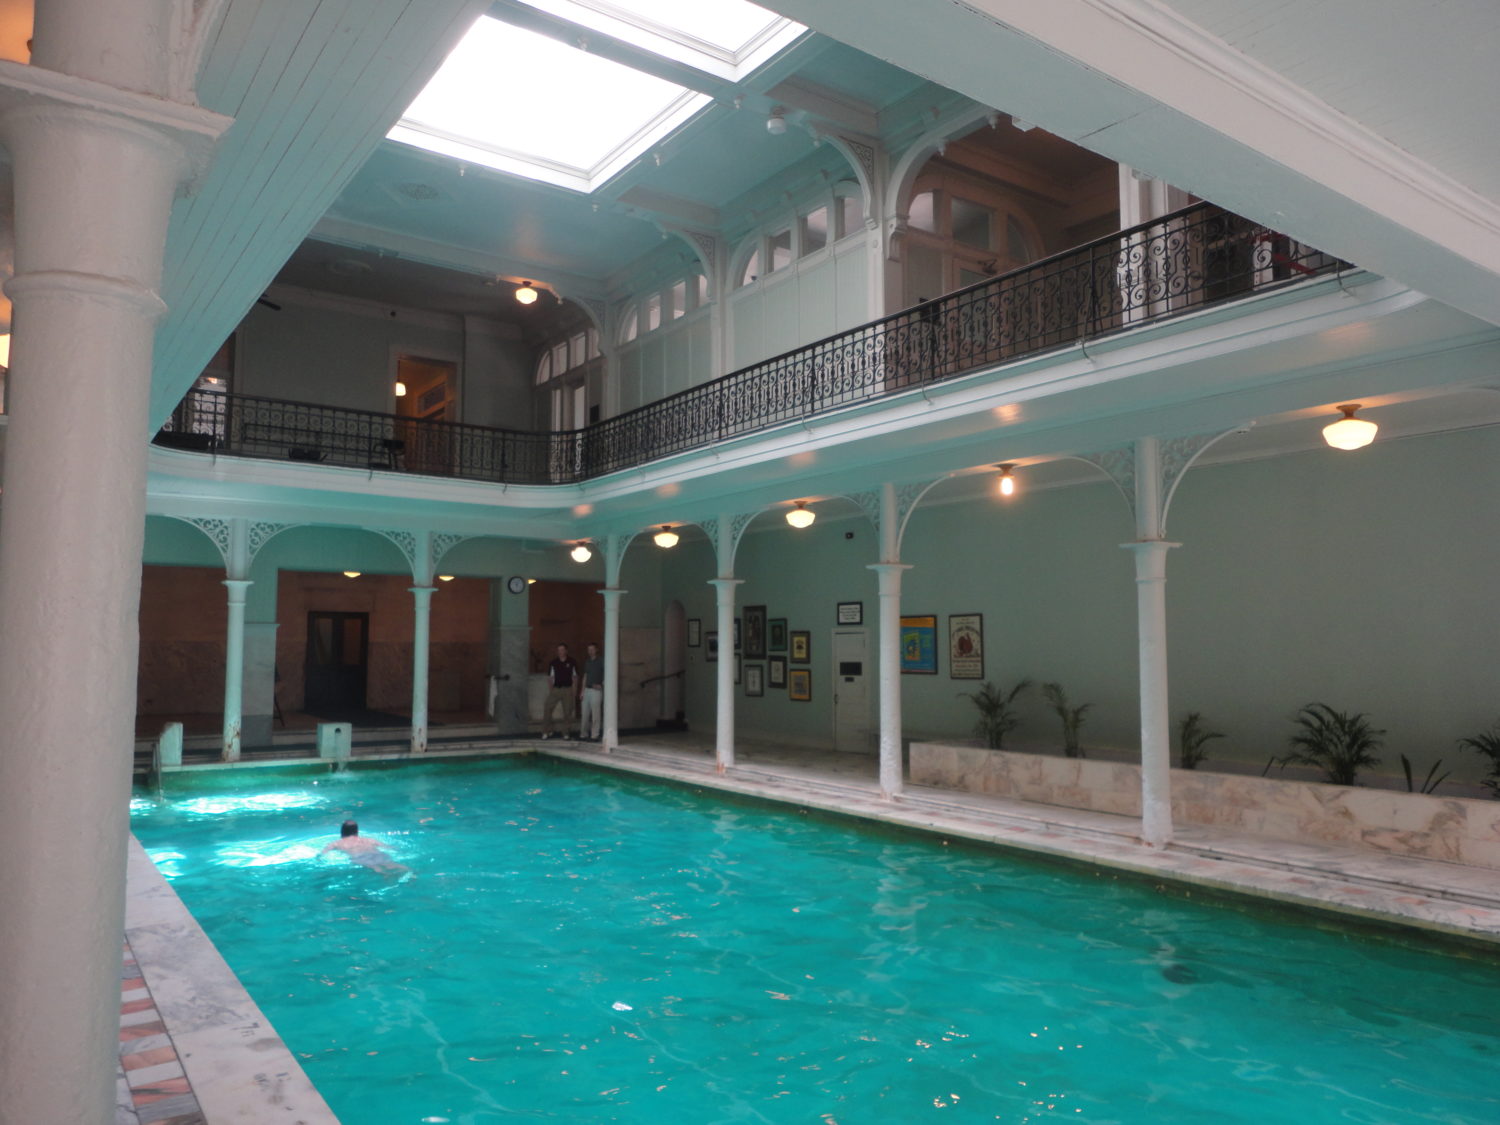 The New Orleans Athletic Club | The McEnery Company